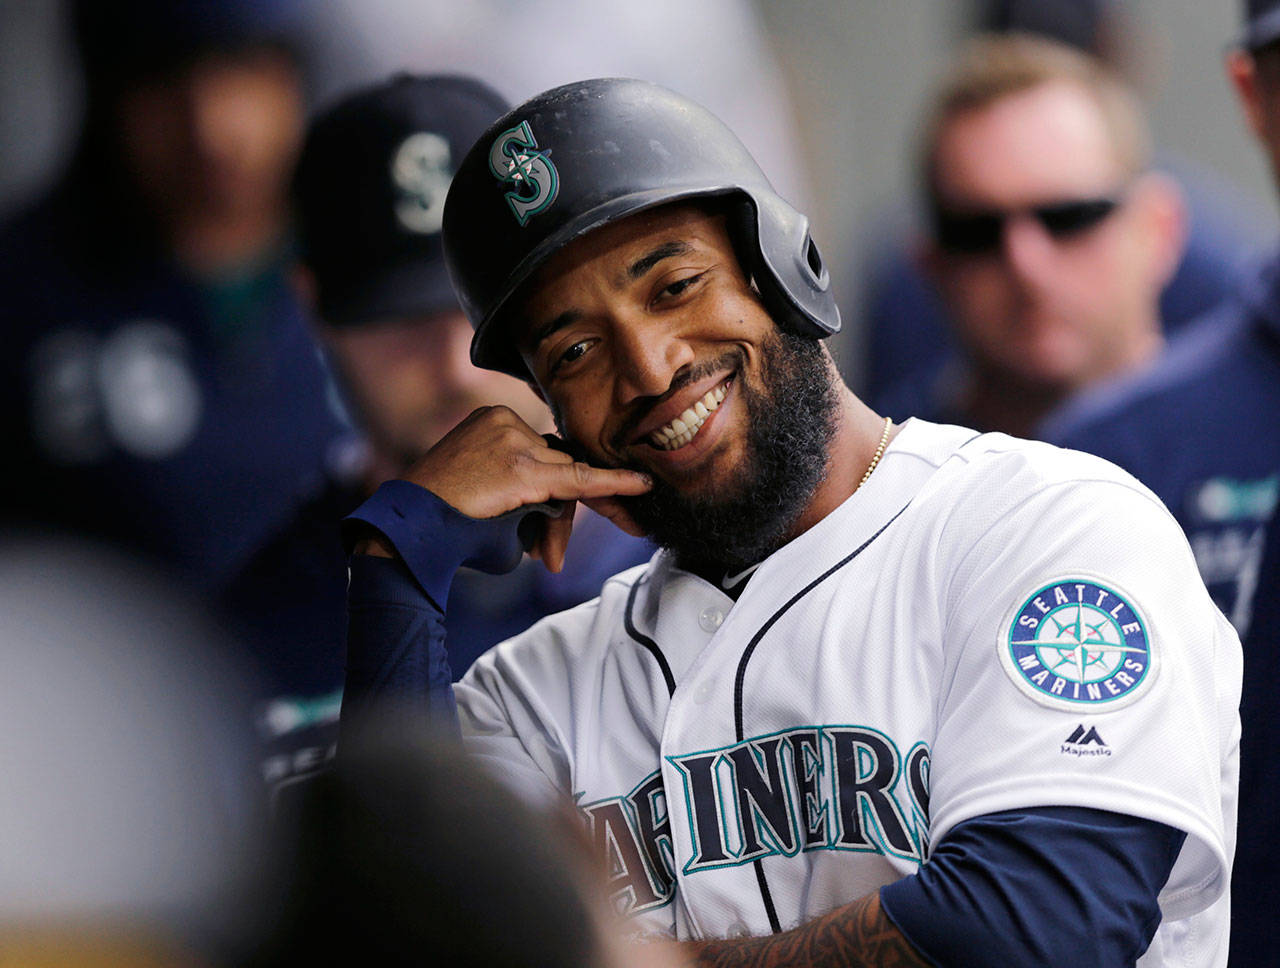 The Mariners’ Domingo Santana celebrates in the dugout after hitting a solo home run during the seventh inning of a game against the Royals on June 19, 2019, in Seattle. (AP Photo/John Froschauer)